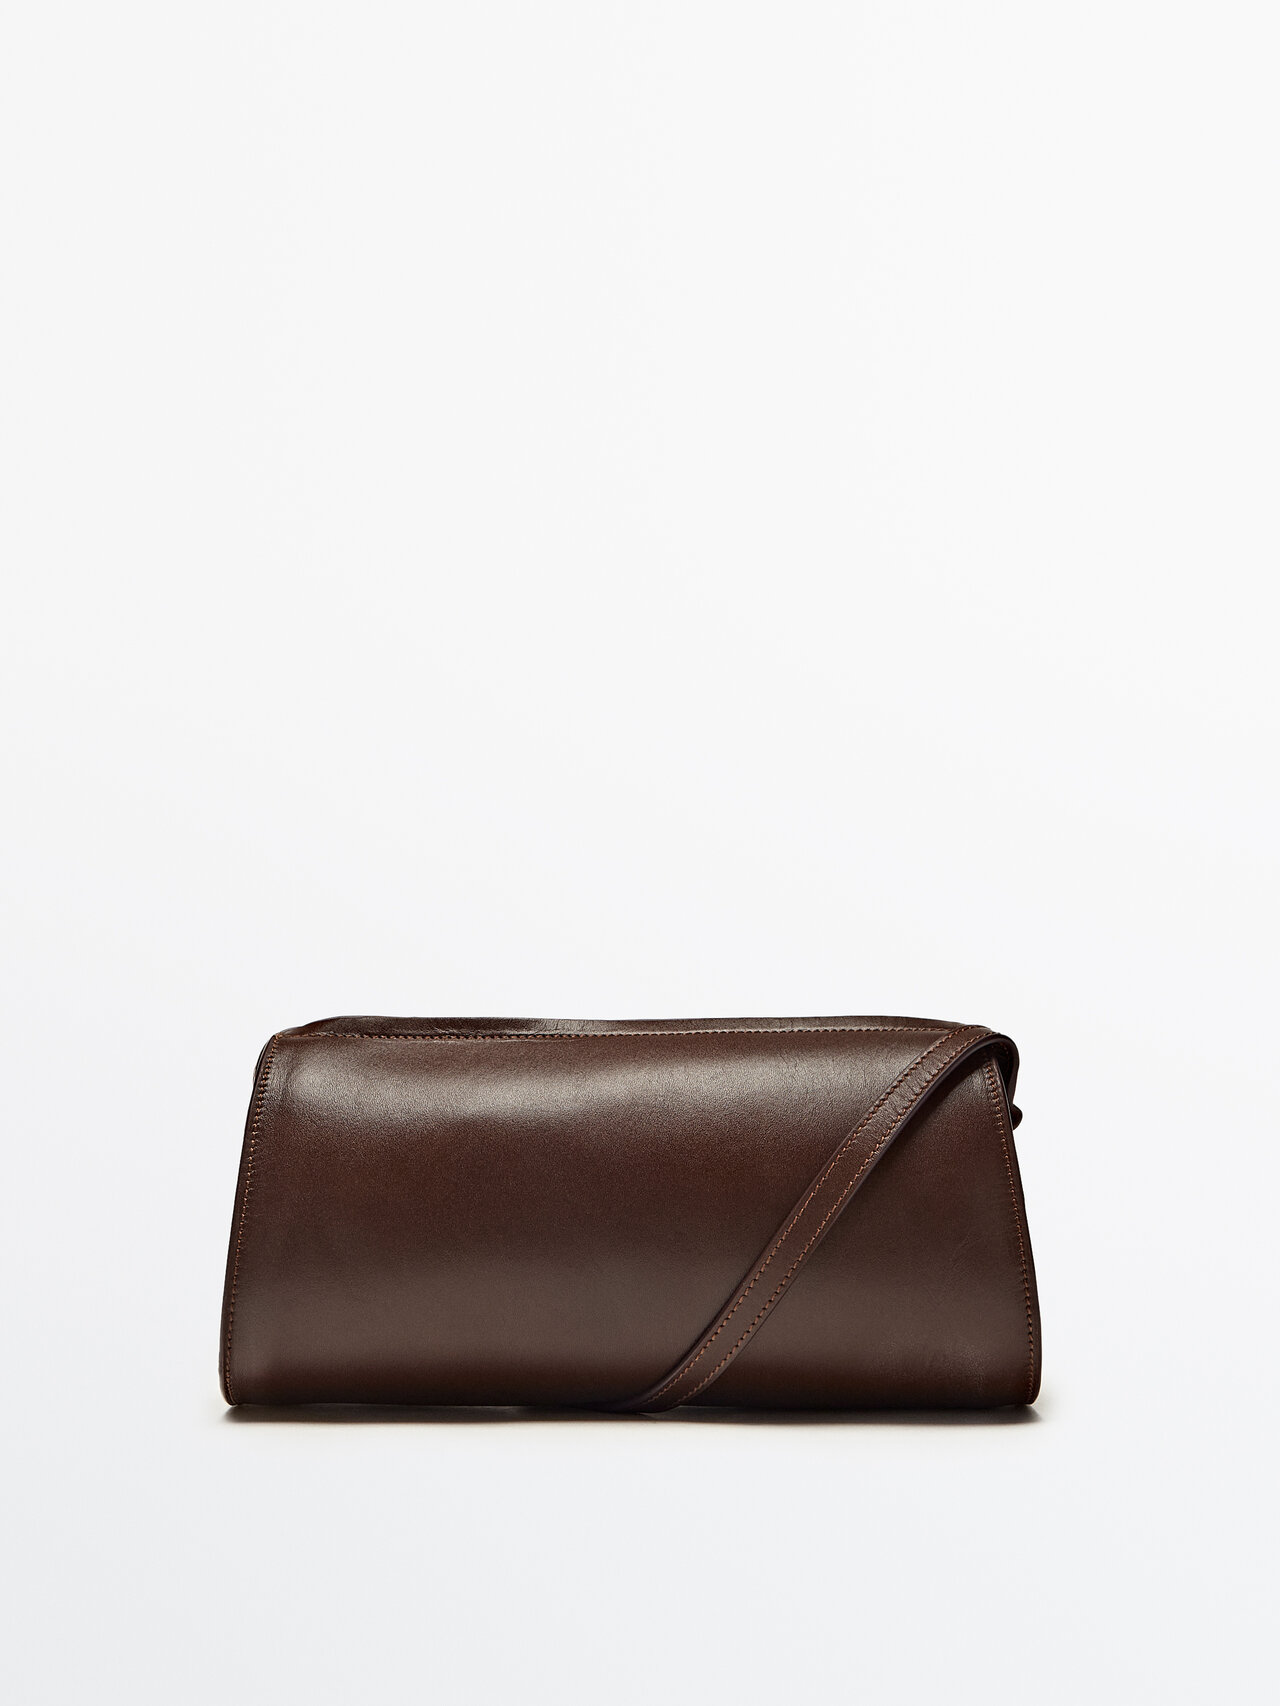 Massimo Dutti Plain Leather Cylindrical Crossbody Bag In Brown